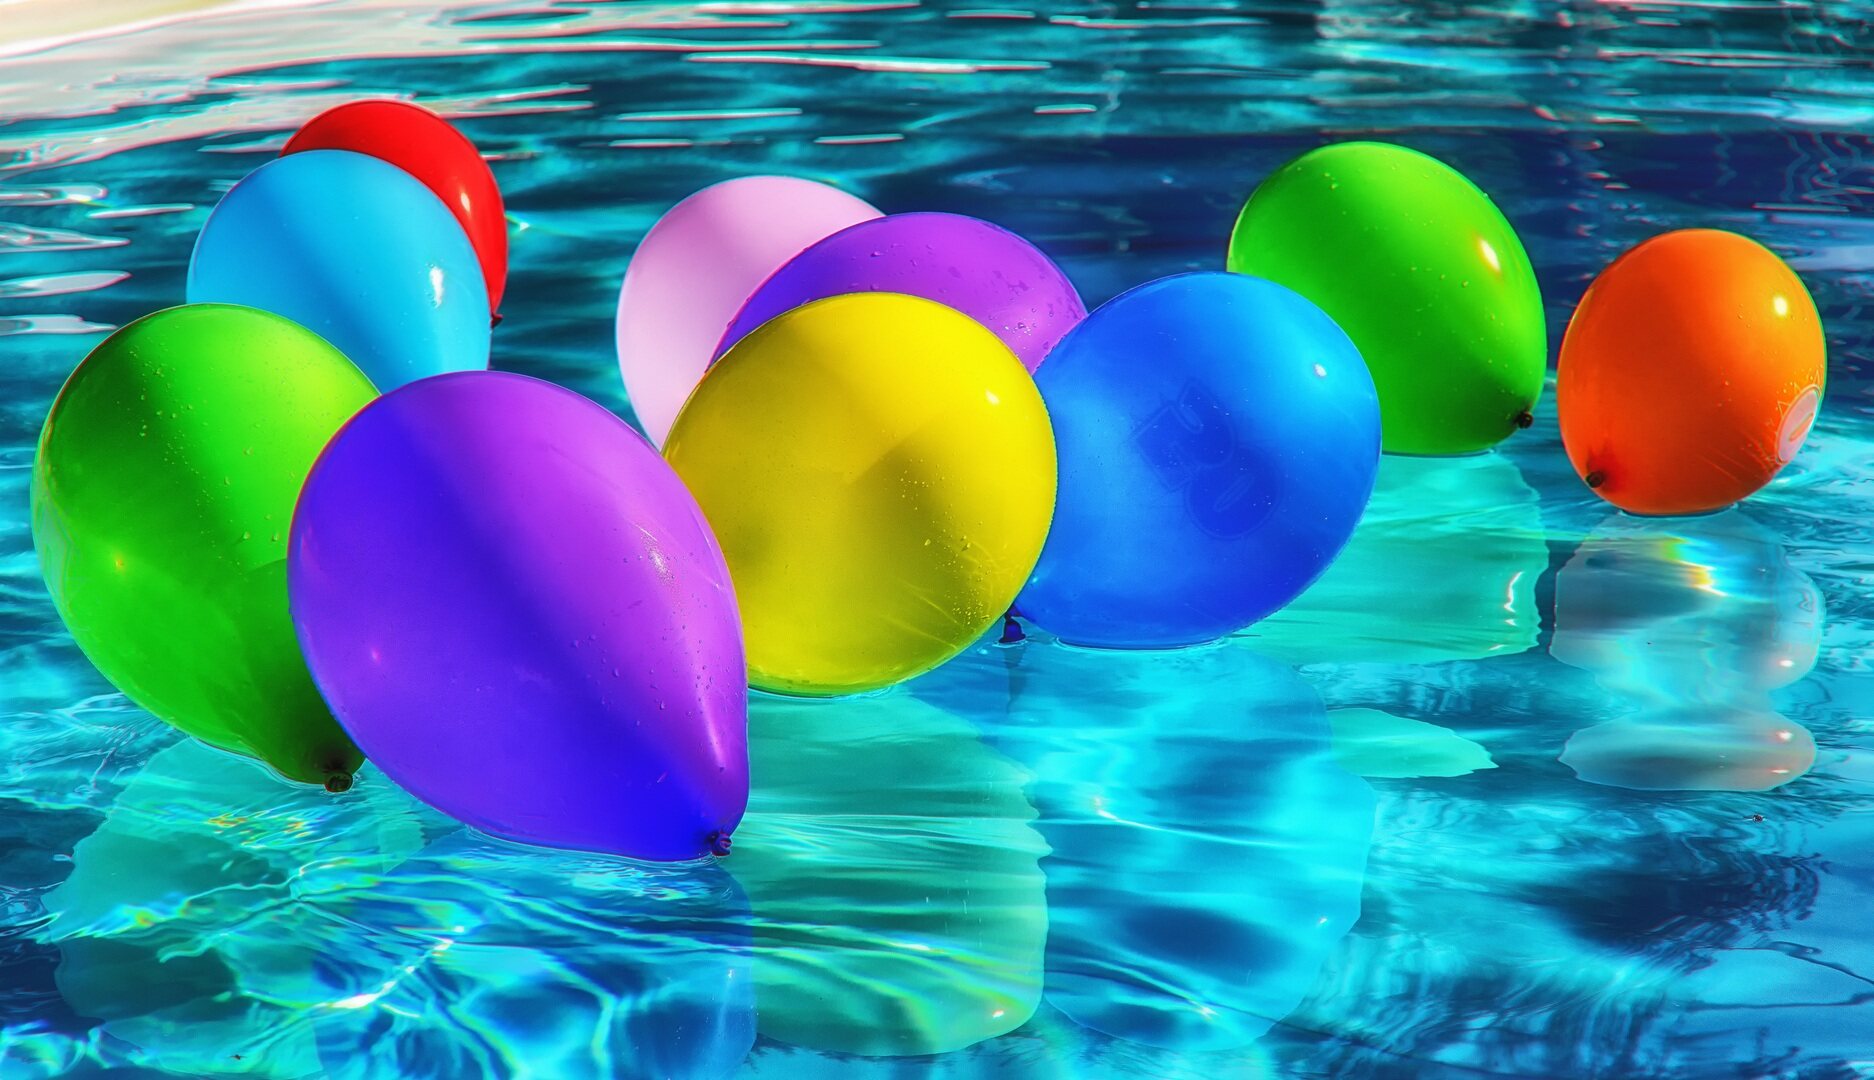 Balloons in a pool